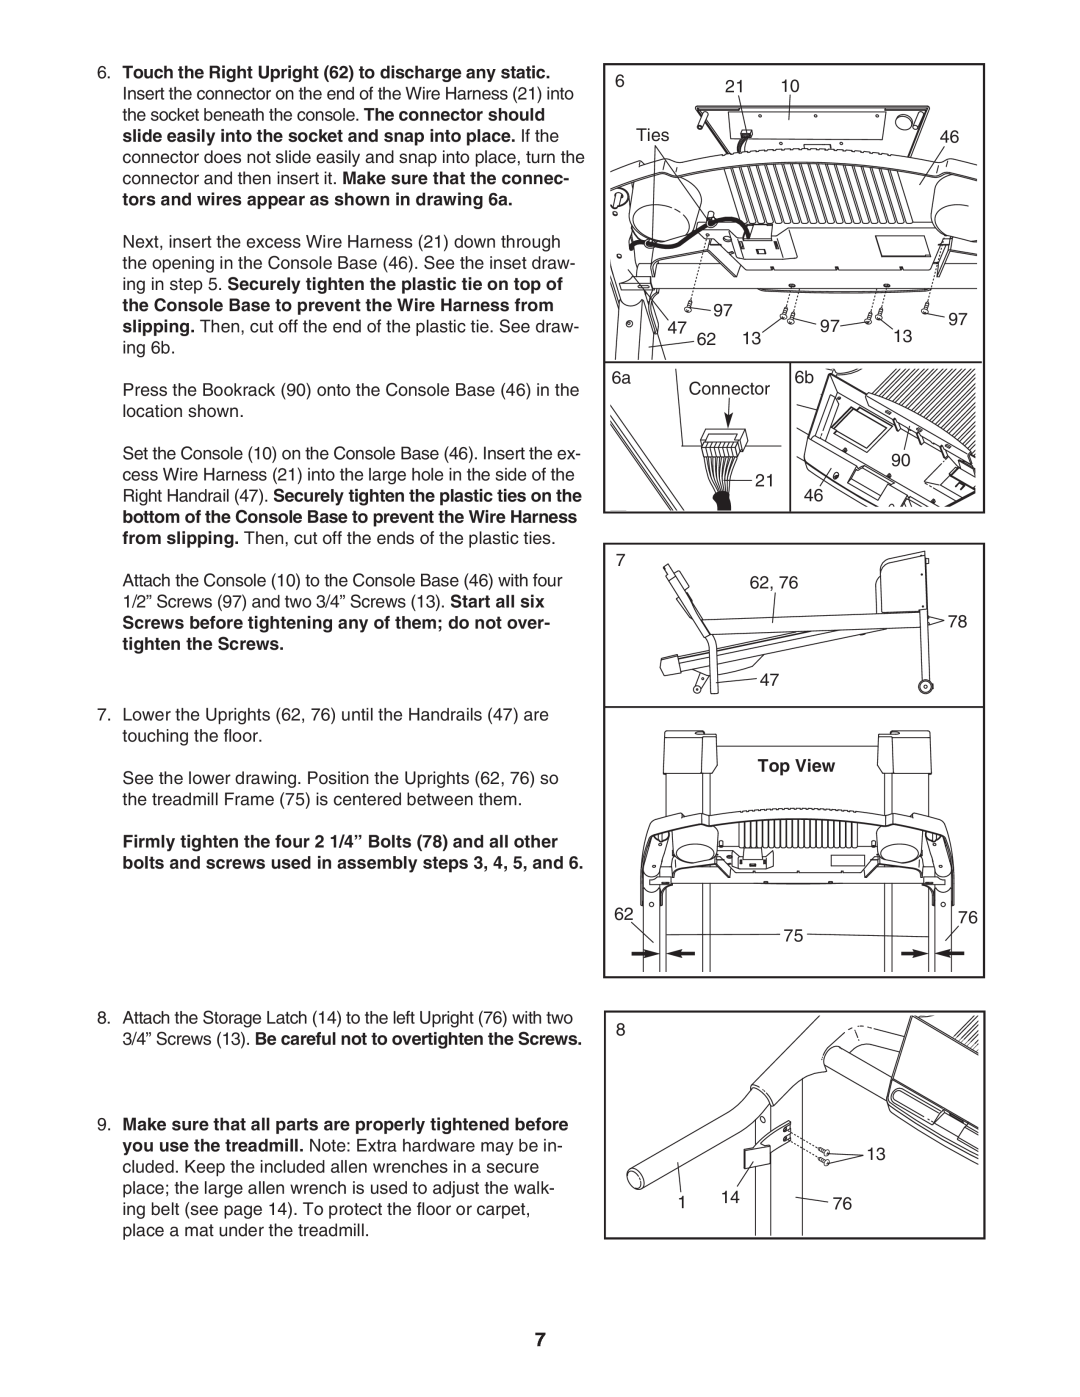 Image IMTL41205.0 user manual Screws before tightening any of them do not over- tighten the Screws 